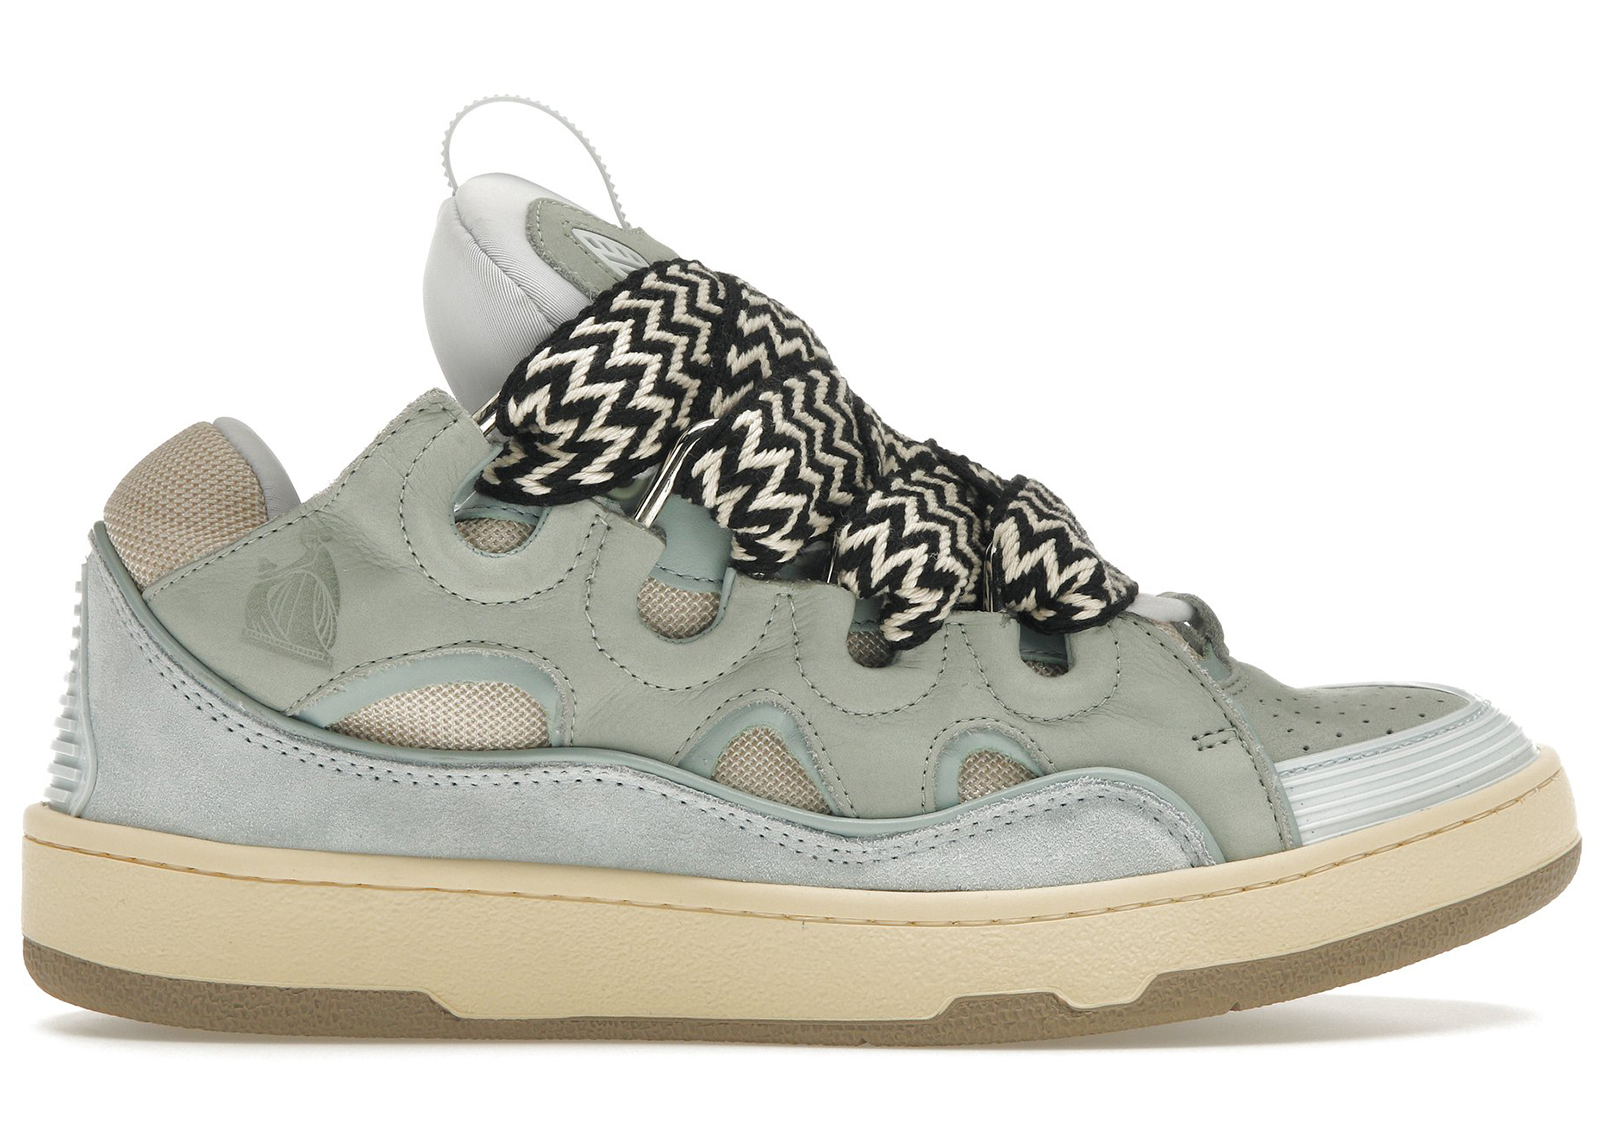 Lanvin Curb leather sneakers - Green